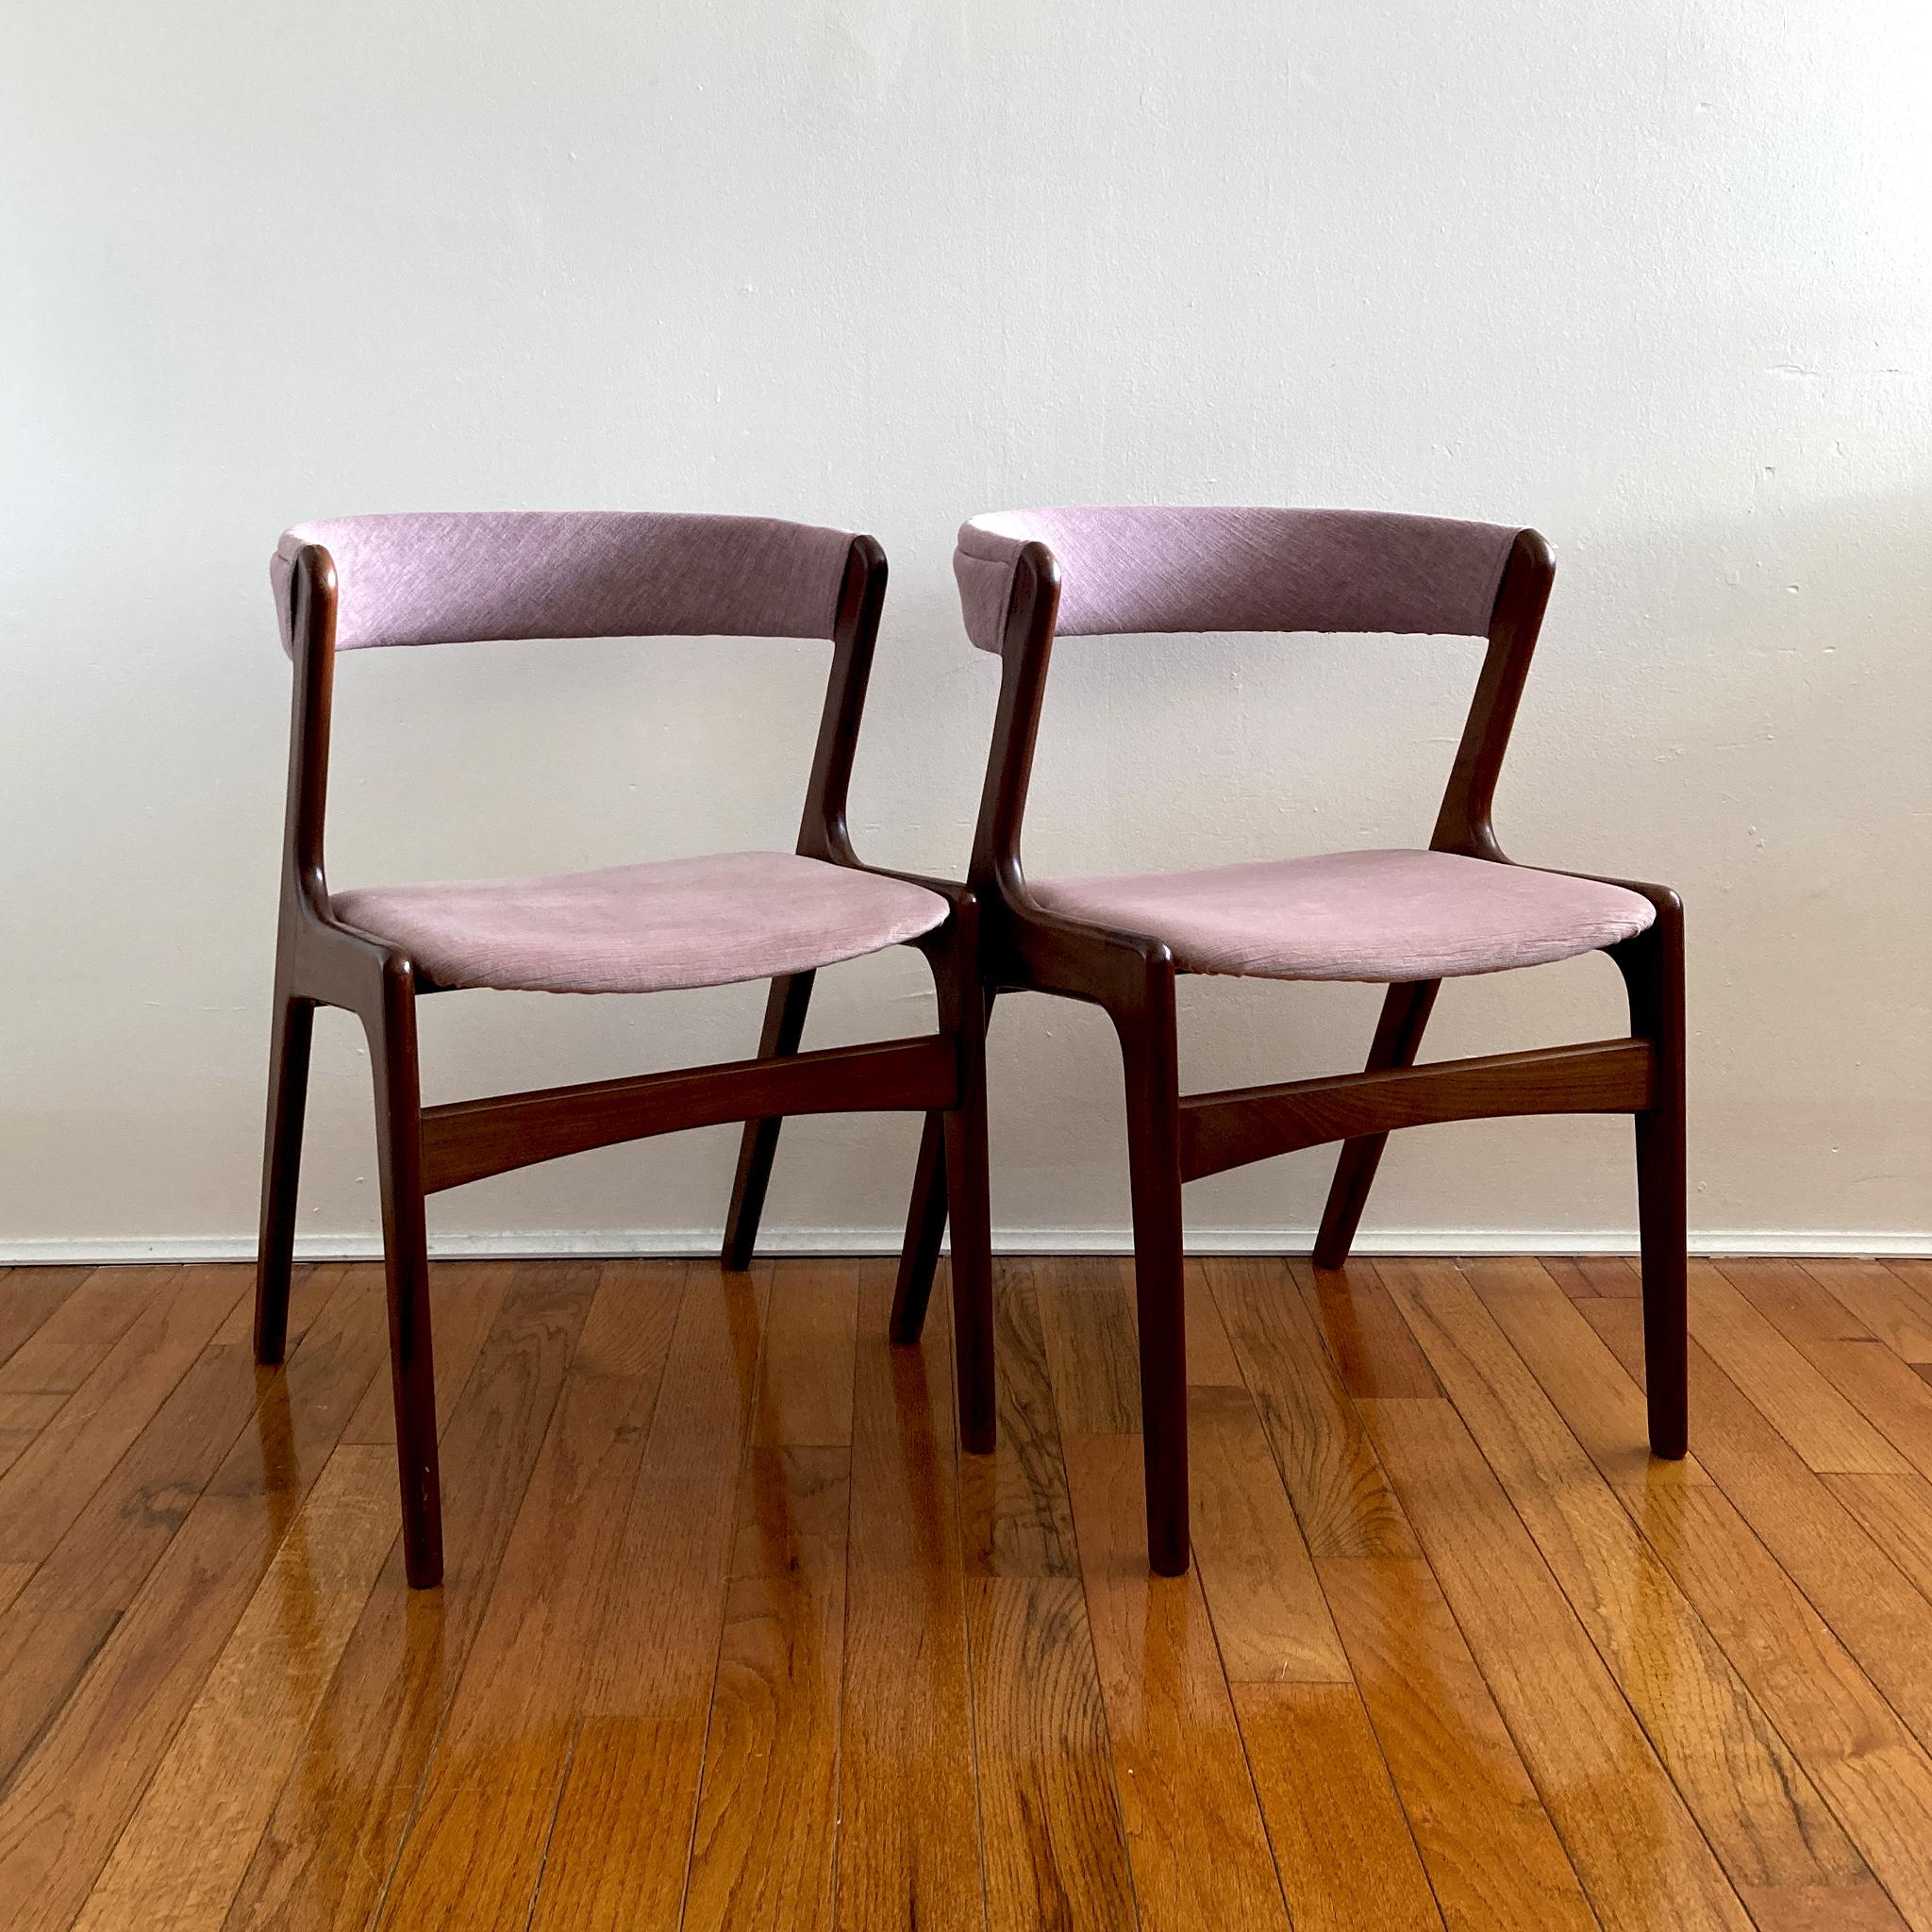 Set of two beautiful mid-century chairs, Kai Kristiansen’s iconic curved back chair silhouette. Teak frame, seat reupholstered with mauve pink velvet and curved back reupholstered in a coordinating mauve tweed. Structurally sound, in good vintage